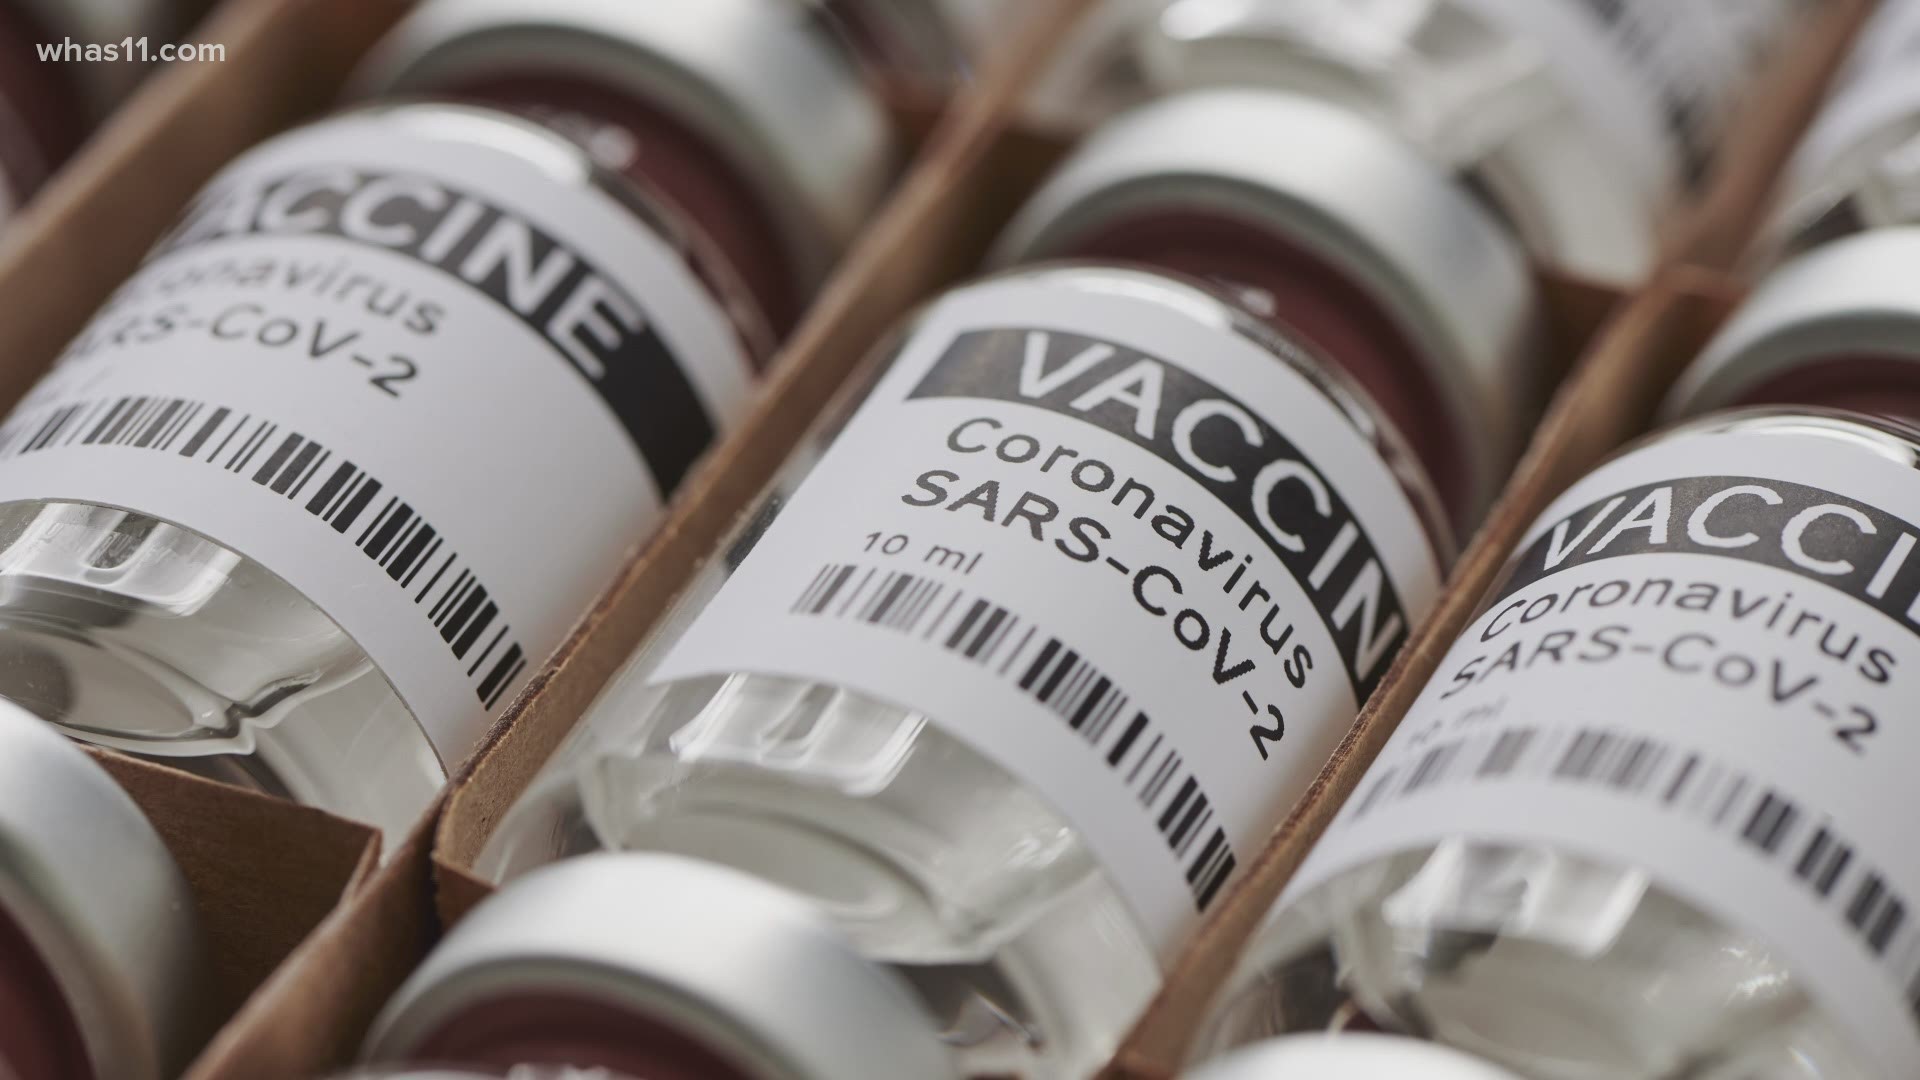 According to data from the CDC and the U.S. Census Bureau, the percentage of people who are unsure or against getting the vaccine is much lower.